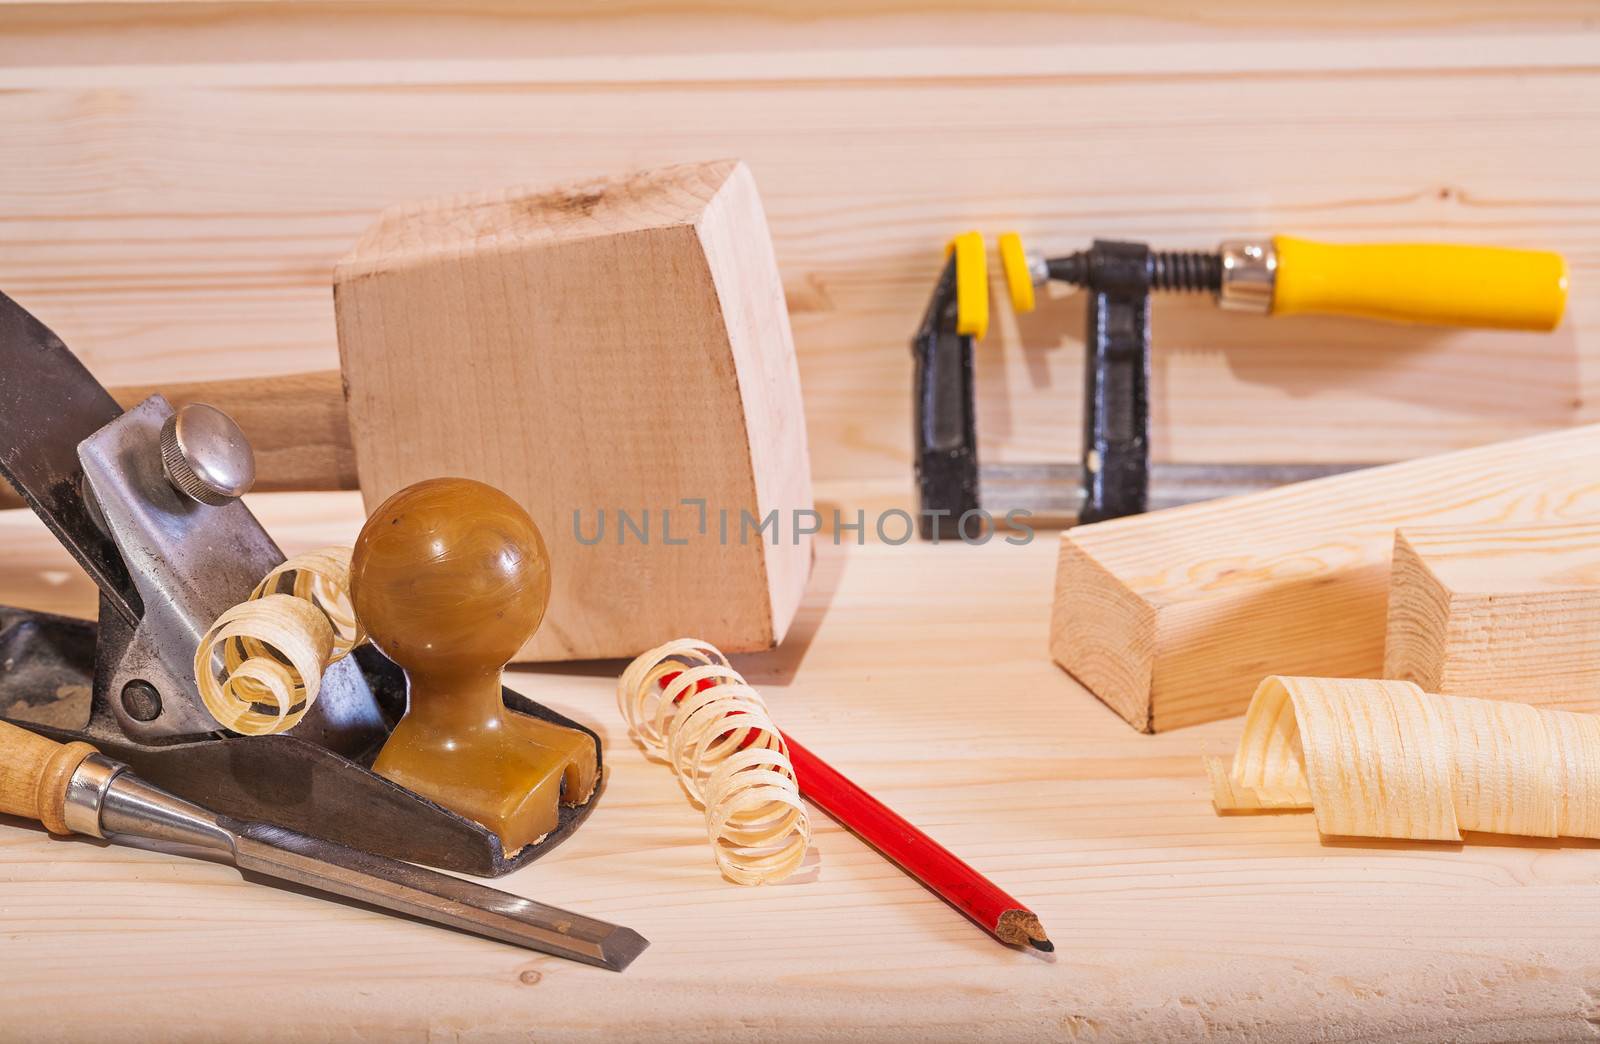 woodworking plane with other tools on wooden board by mihalec